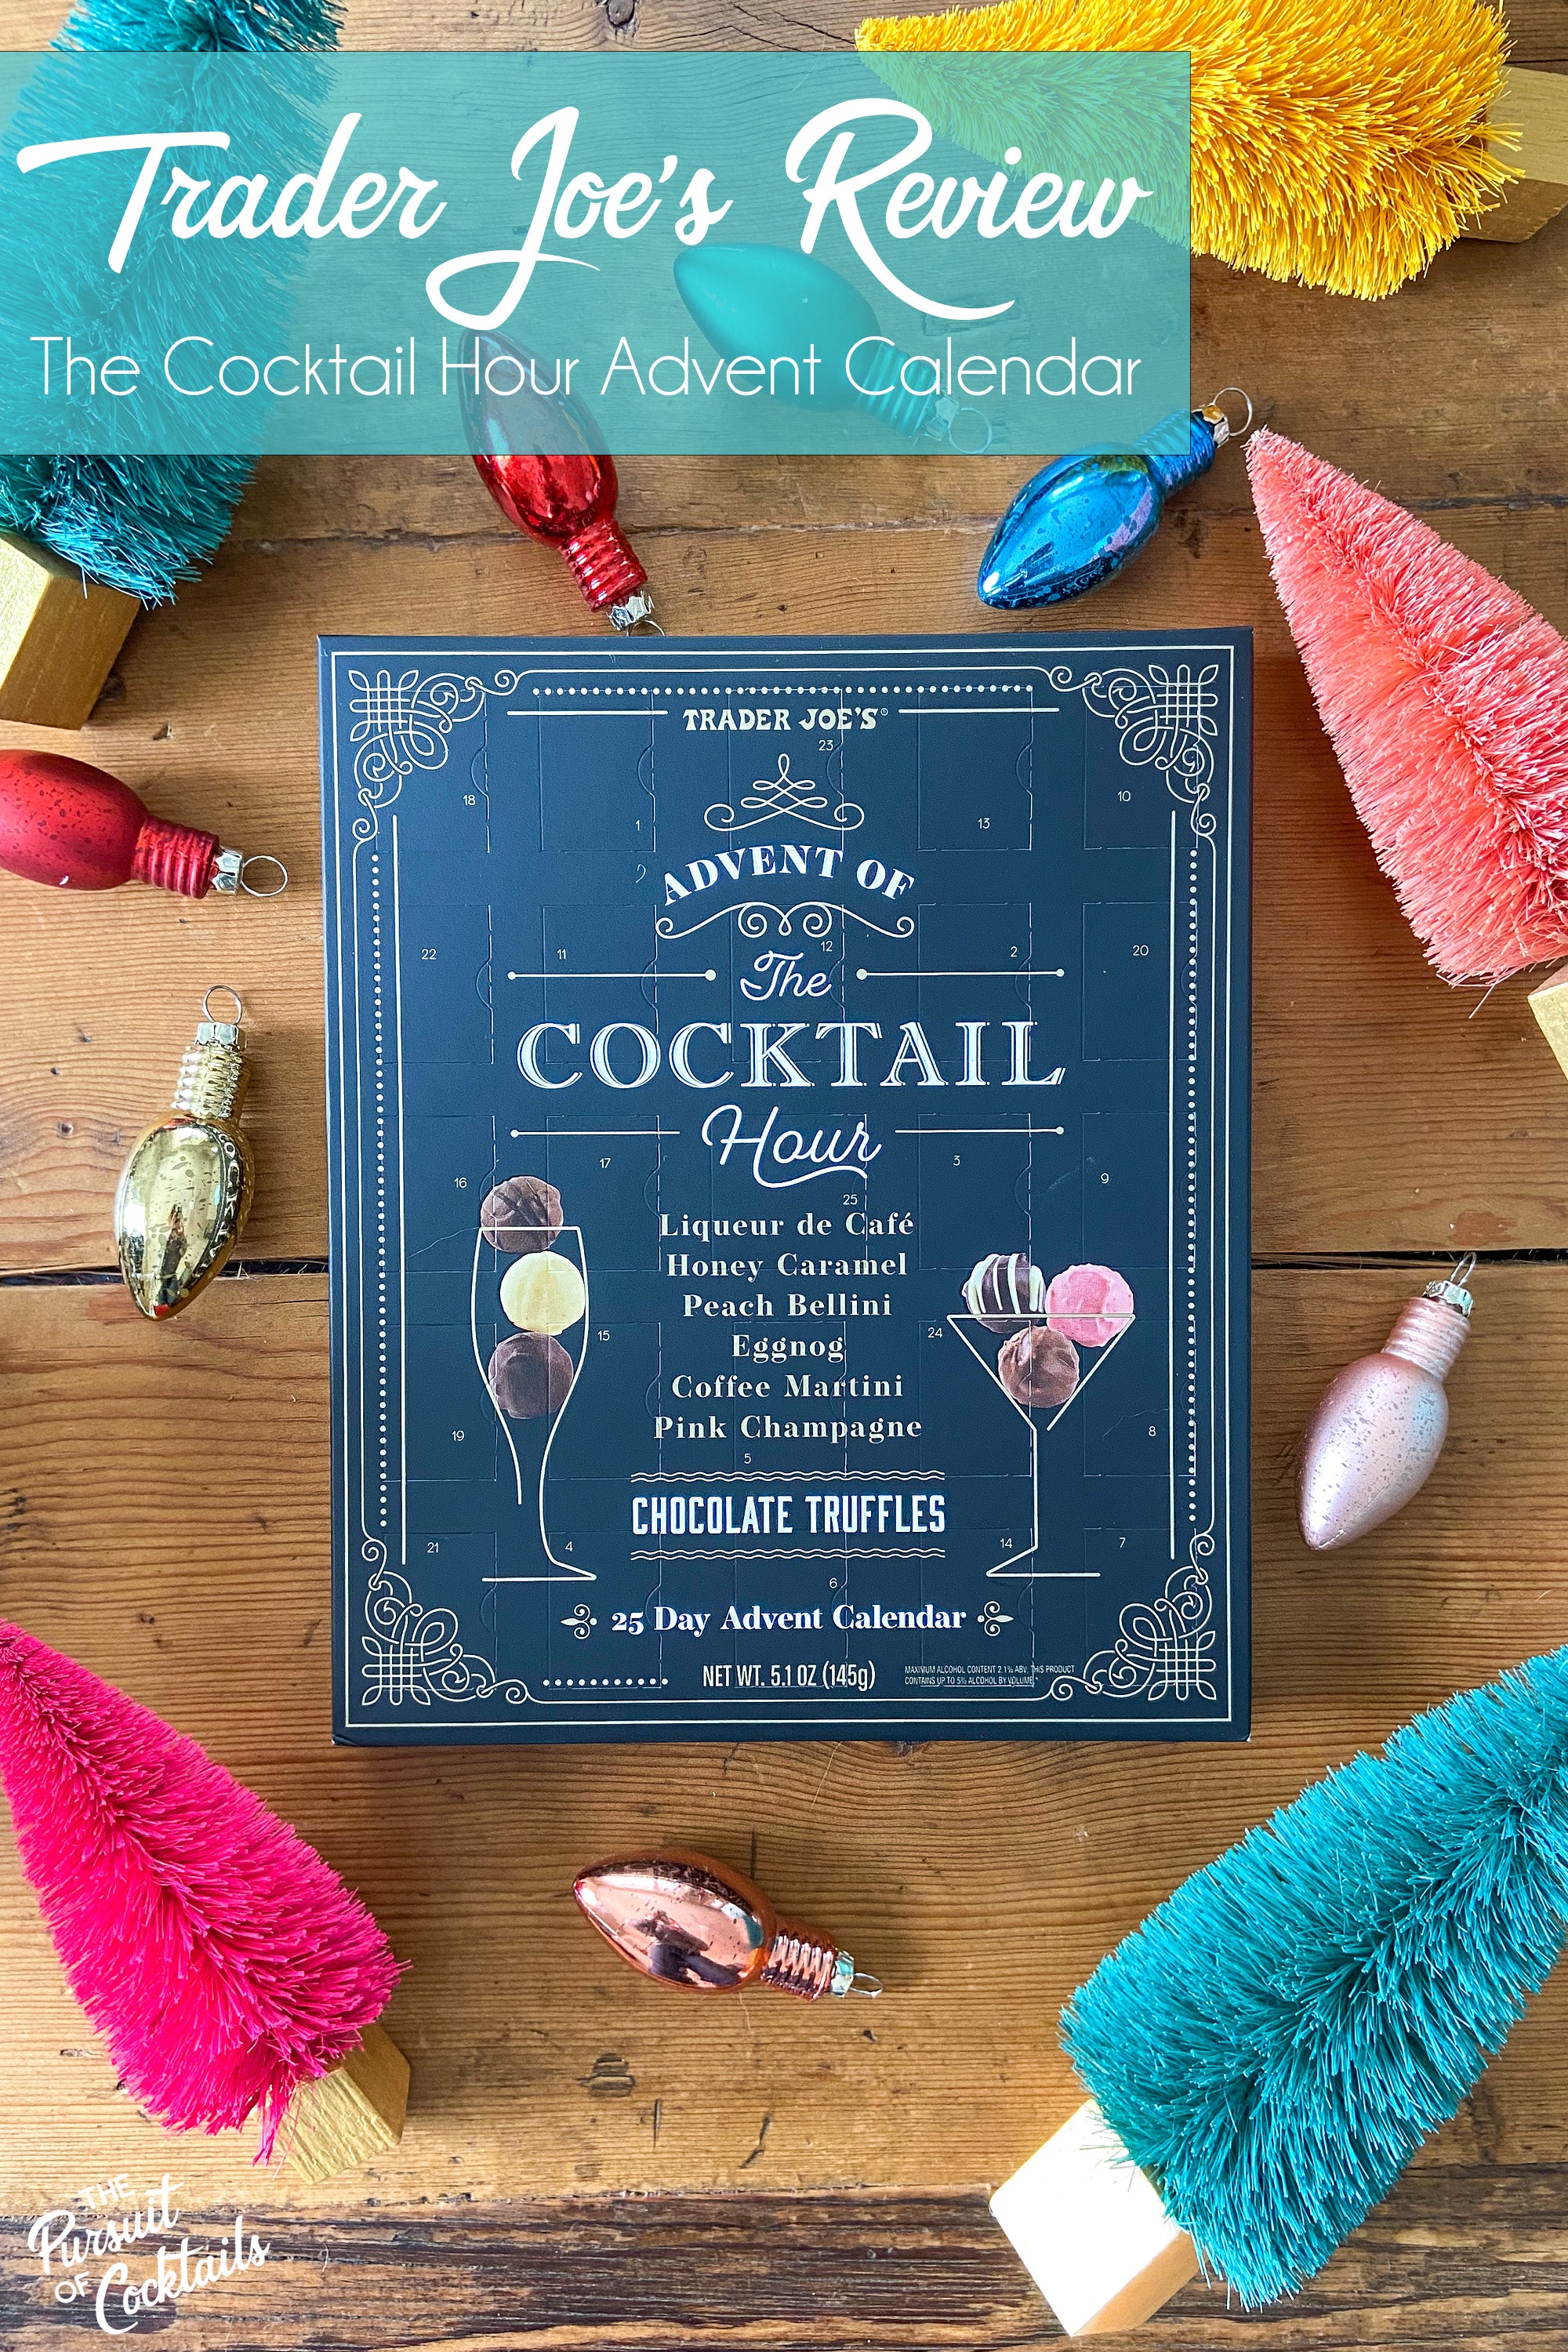 Trader Joe's Cocktail Hour Advent Calendar review by The Pursuit of Cocktails